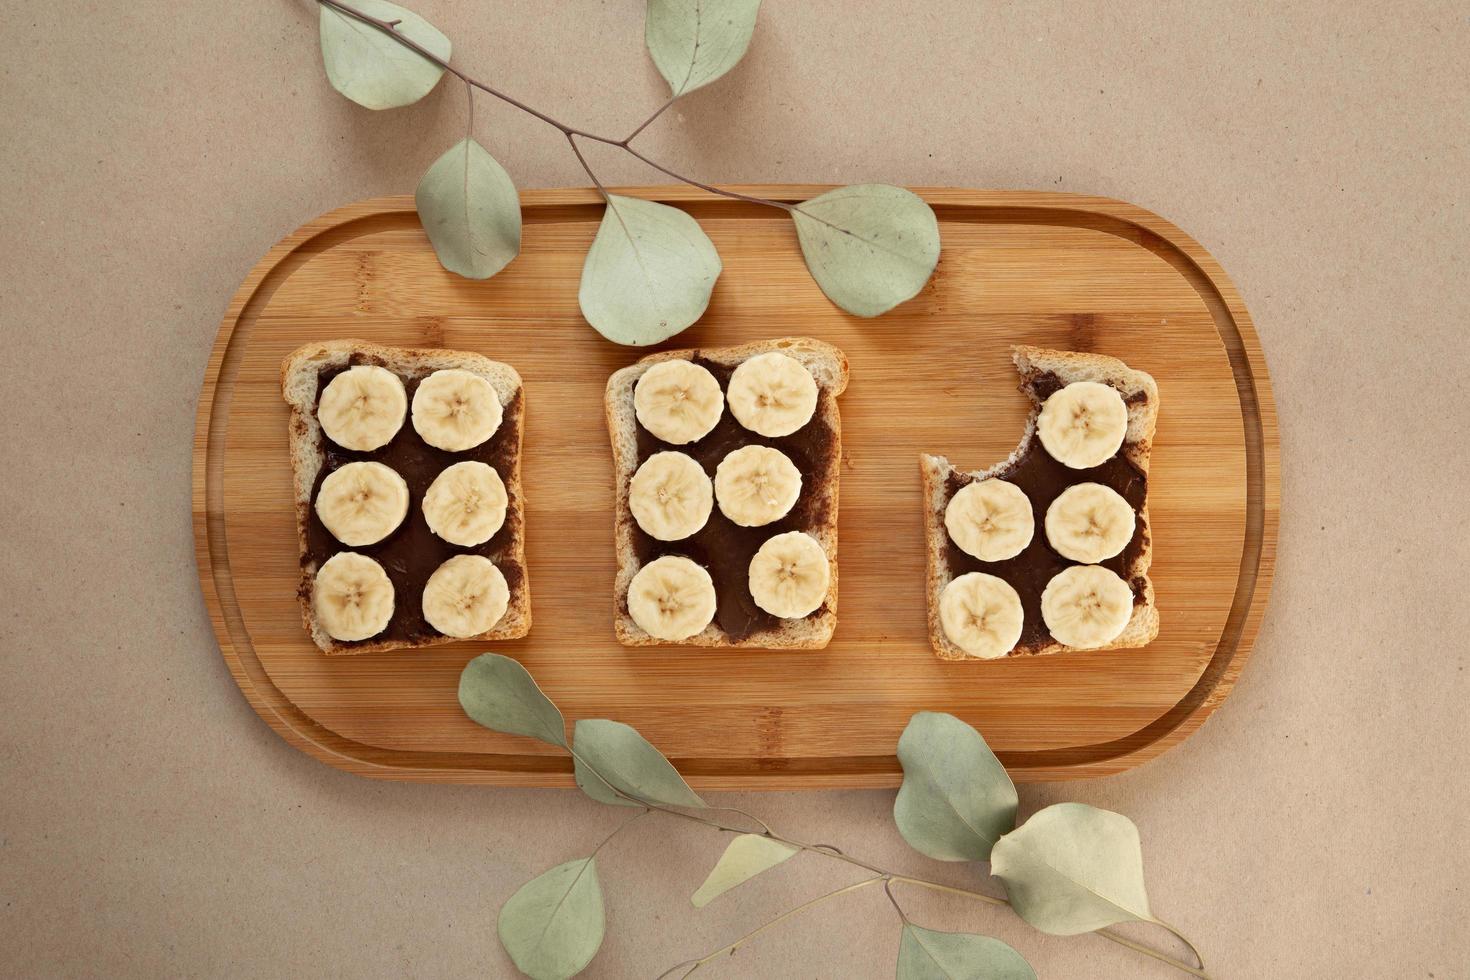 Three banana white bread toasts smeared with chocolate butter photo